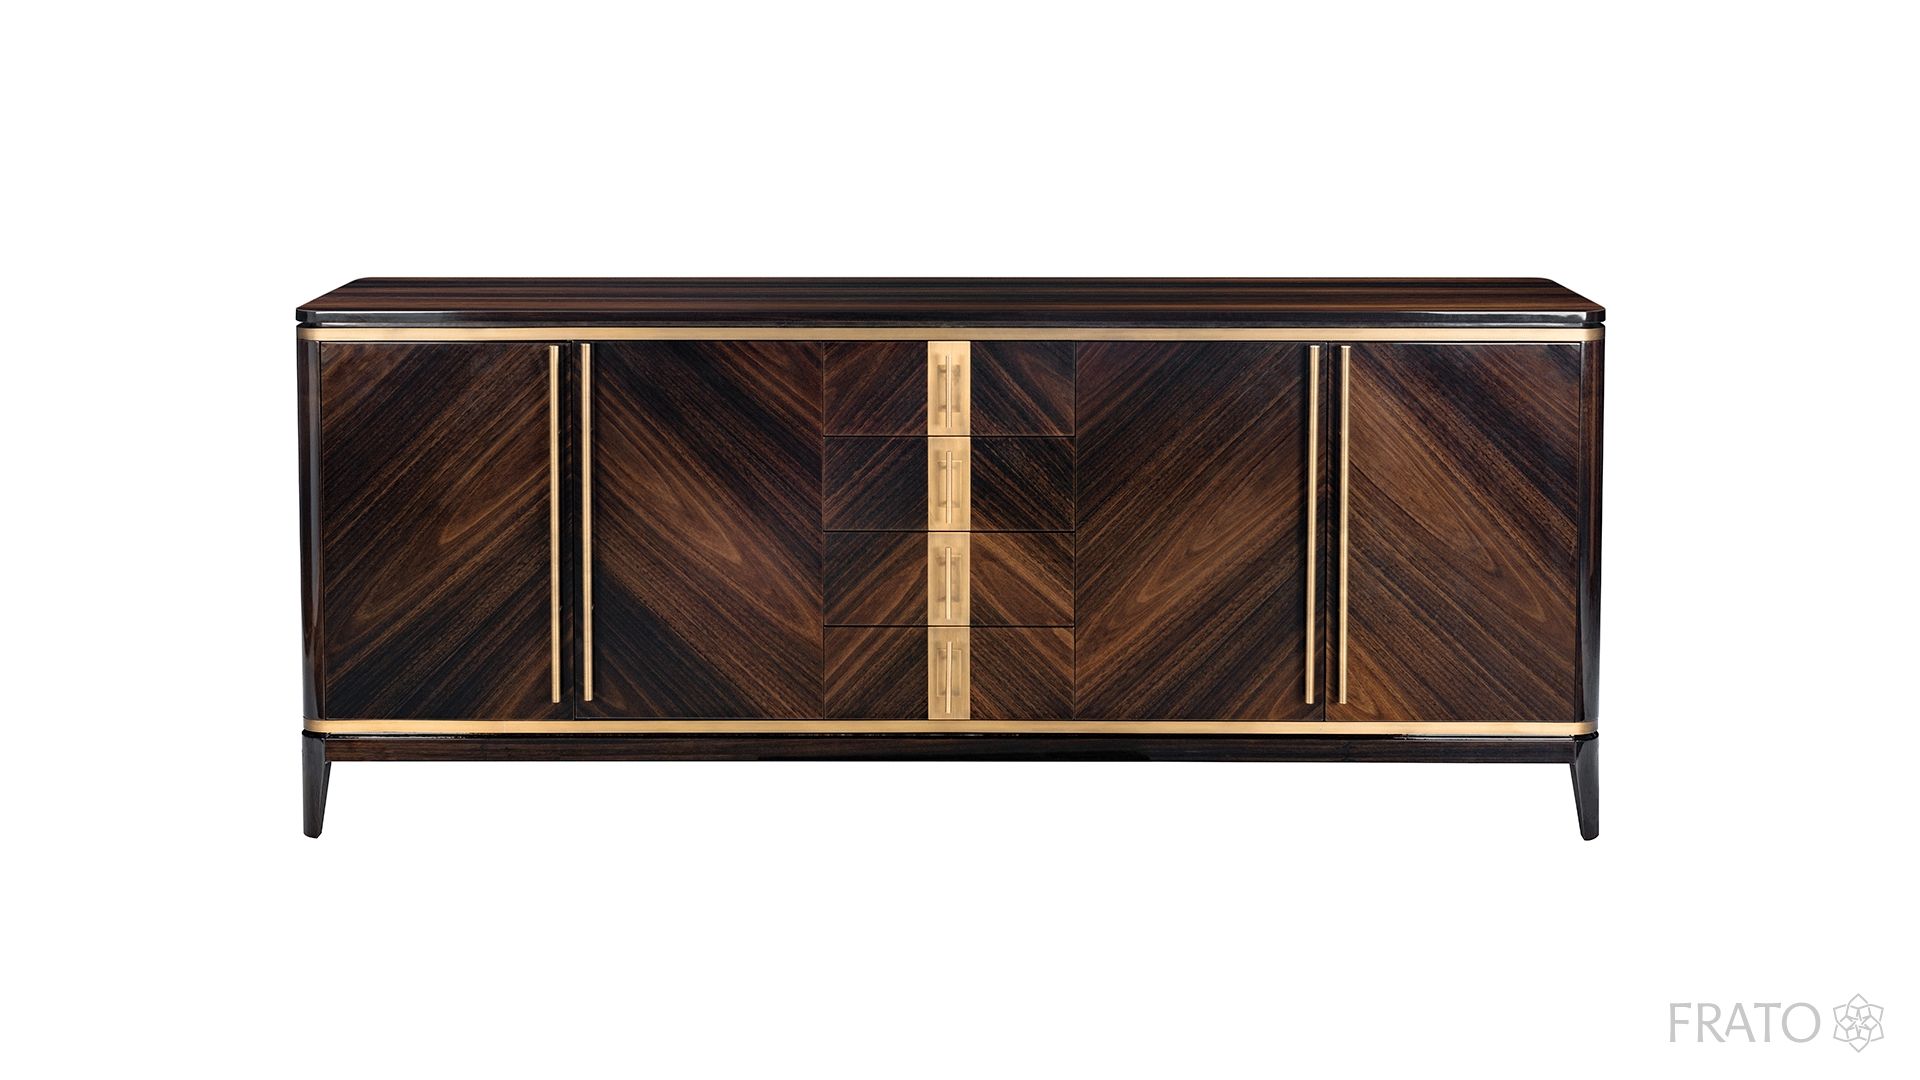 Siena | Shelves | Pinterest | Furniture, Sideboard And Cabinet For Most Popular Rani 4 Door Sideboards (Photo 9 of 20)